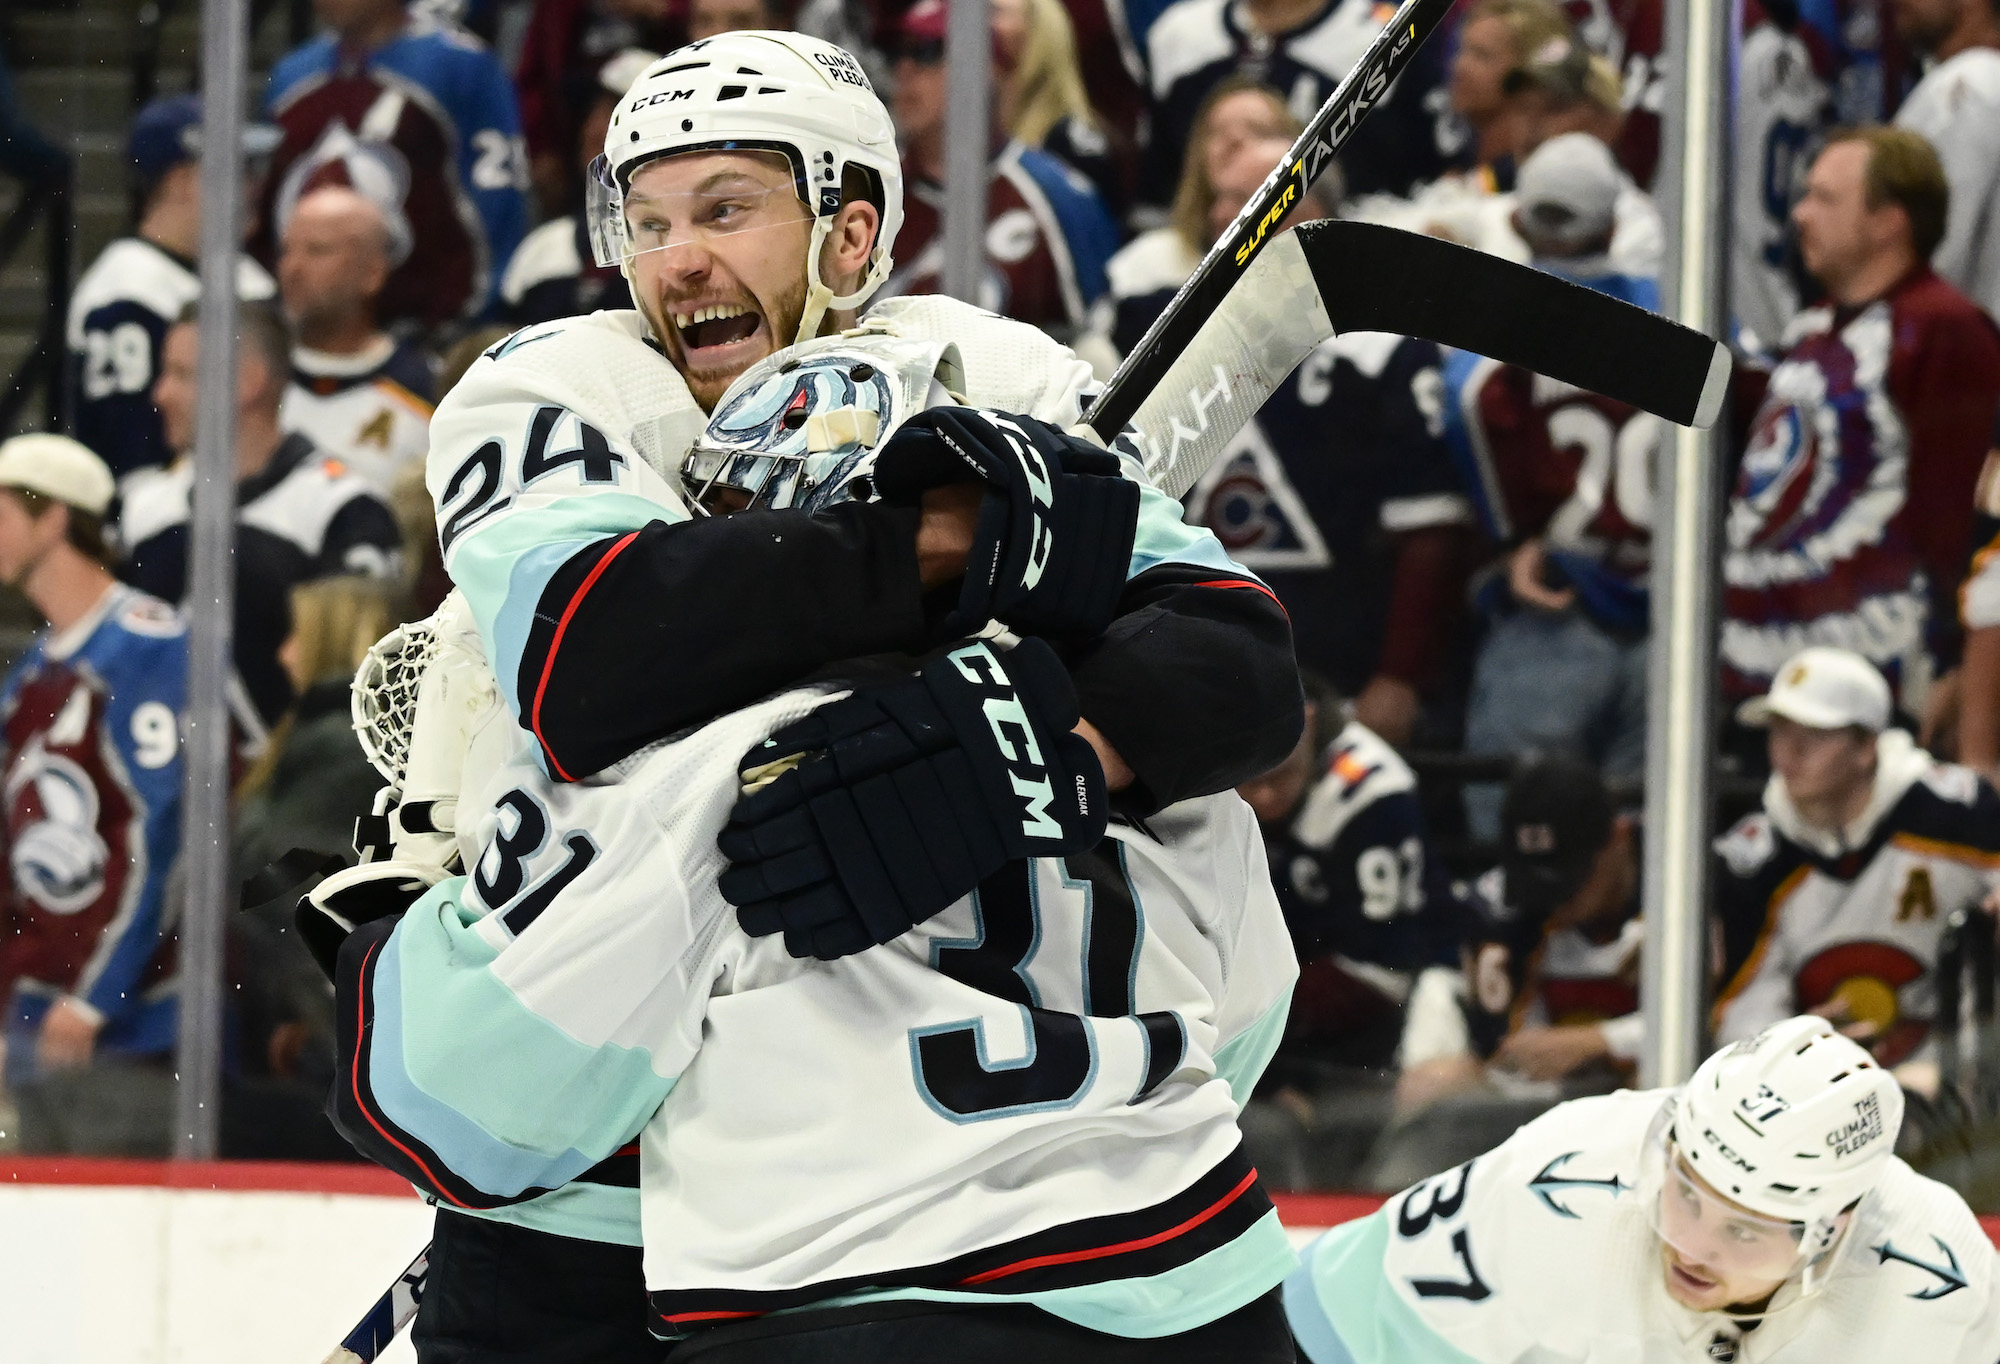 DENVER, CO - APRIL 30: Jamie Oleksiak (24) of the Seattle Kraken celebrates with Goaltender Philipp Grubauer (31) after defeating Mikko Rantanen and the Colorado Avalanche winning the first round of the NHL Stanley Cup Playoffs at Ball Arena April 30, 2023. The Avalanche lost 2-1. (Photo by Andy Cross/The Denver Post)